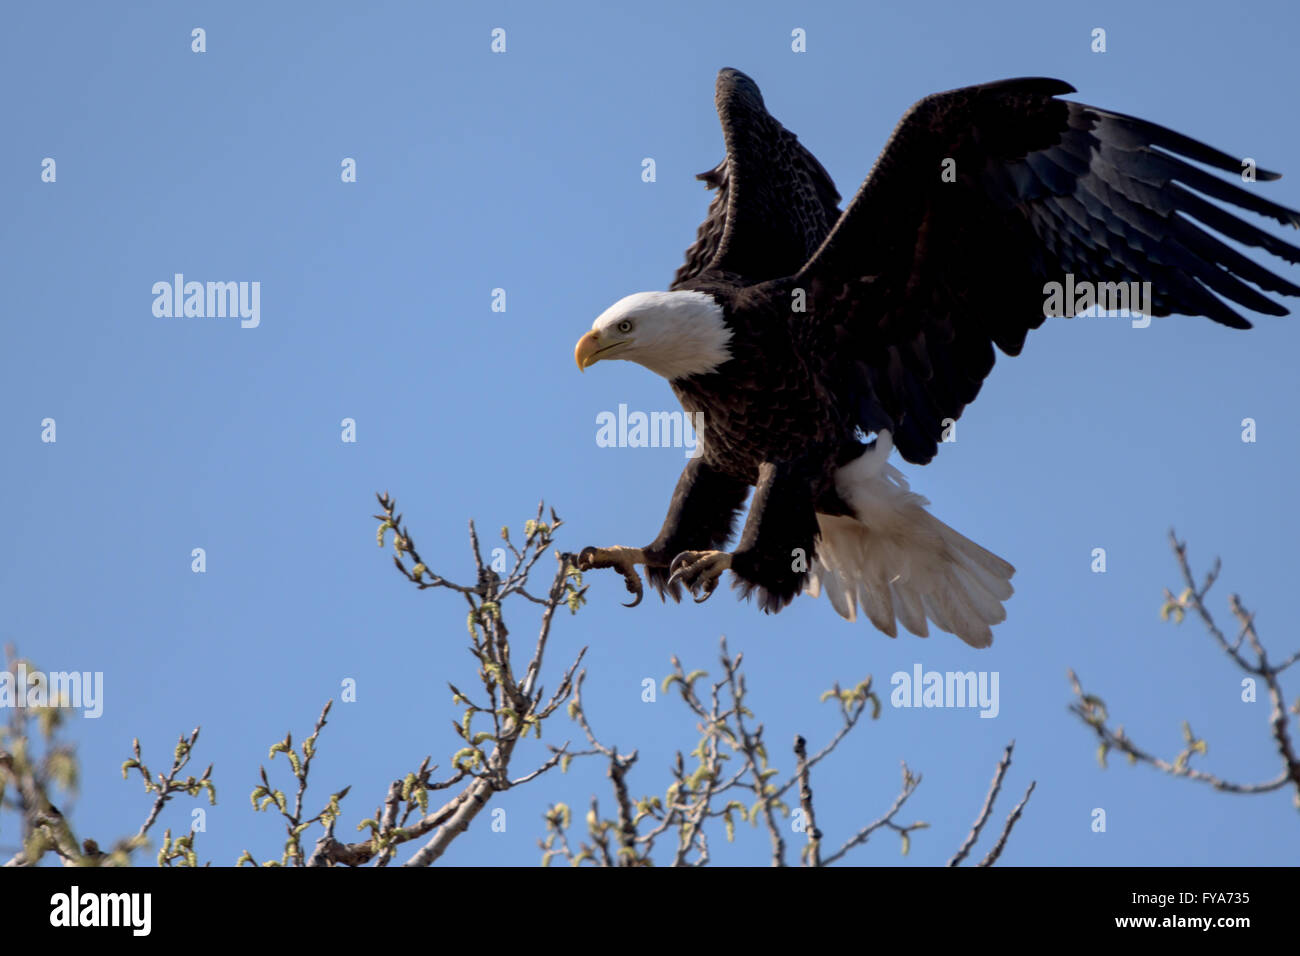 An American Bald Eagle landing on a treee on a beautiful day. Stock Photo